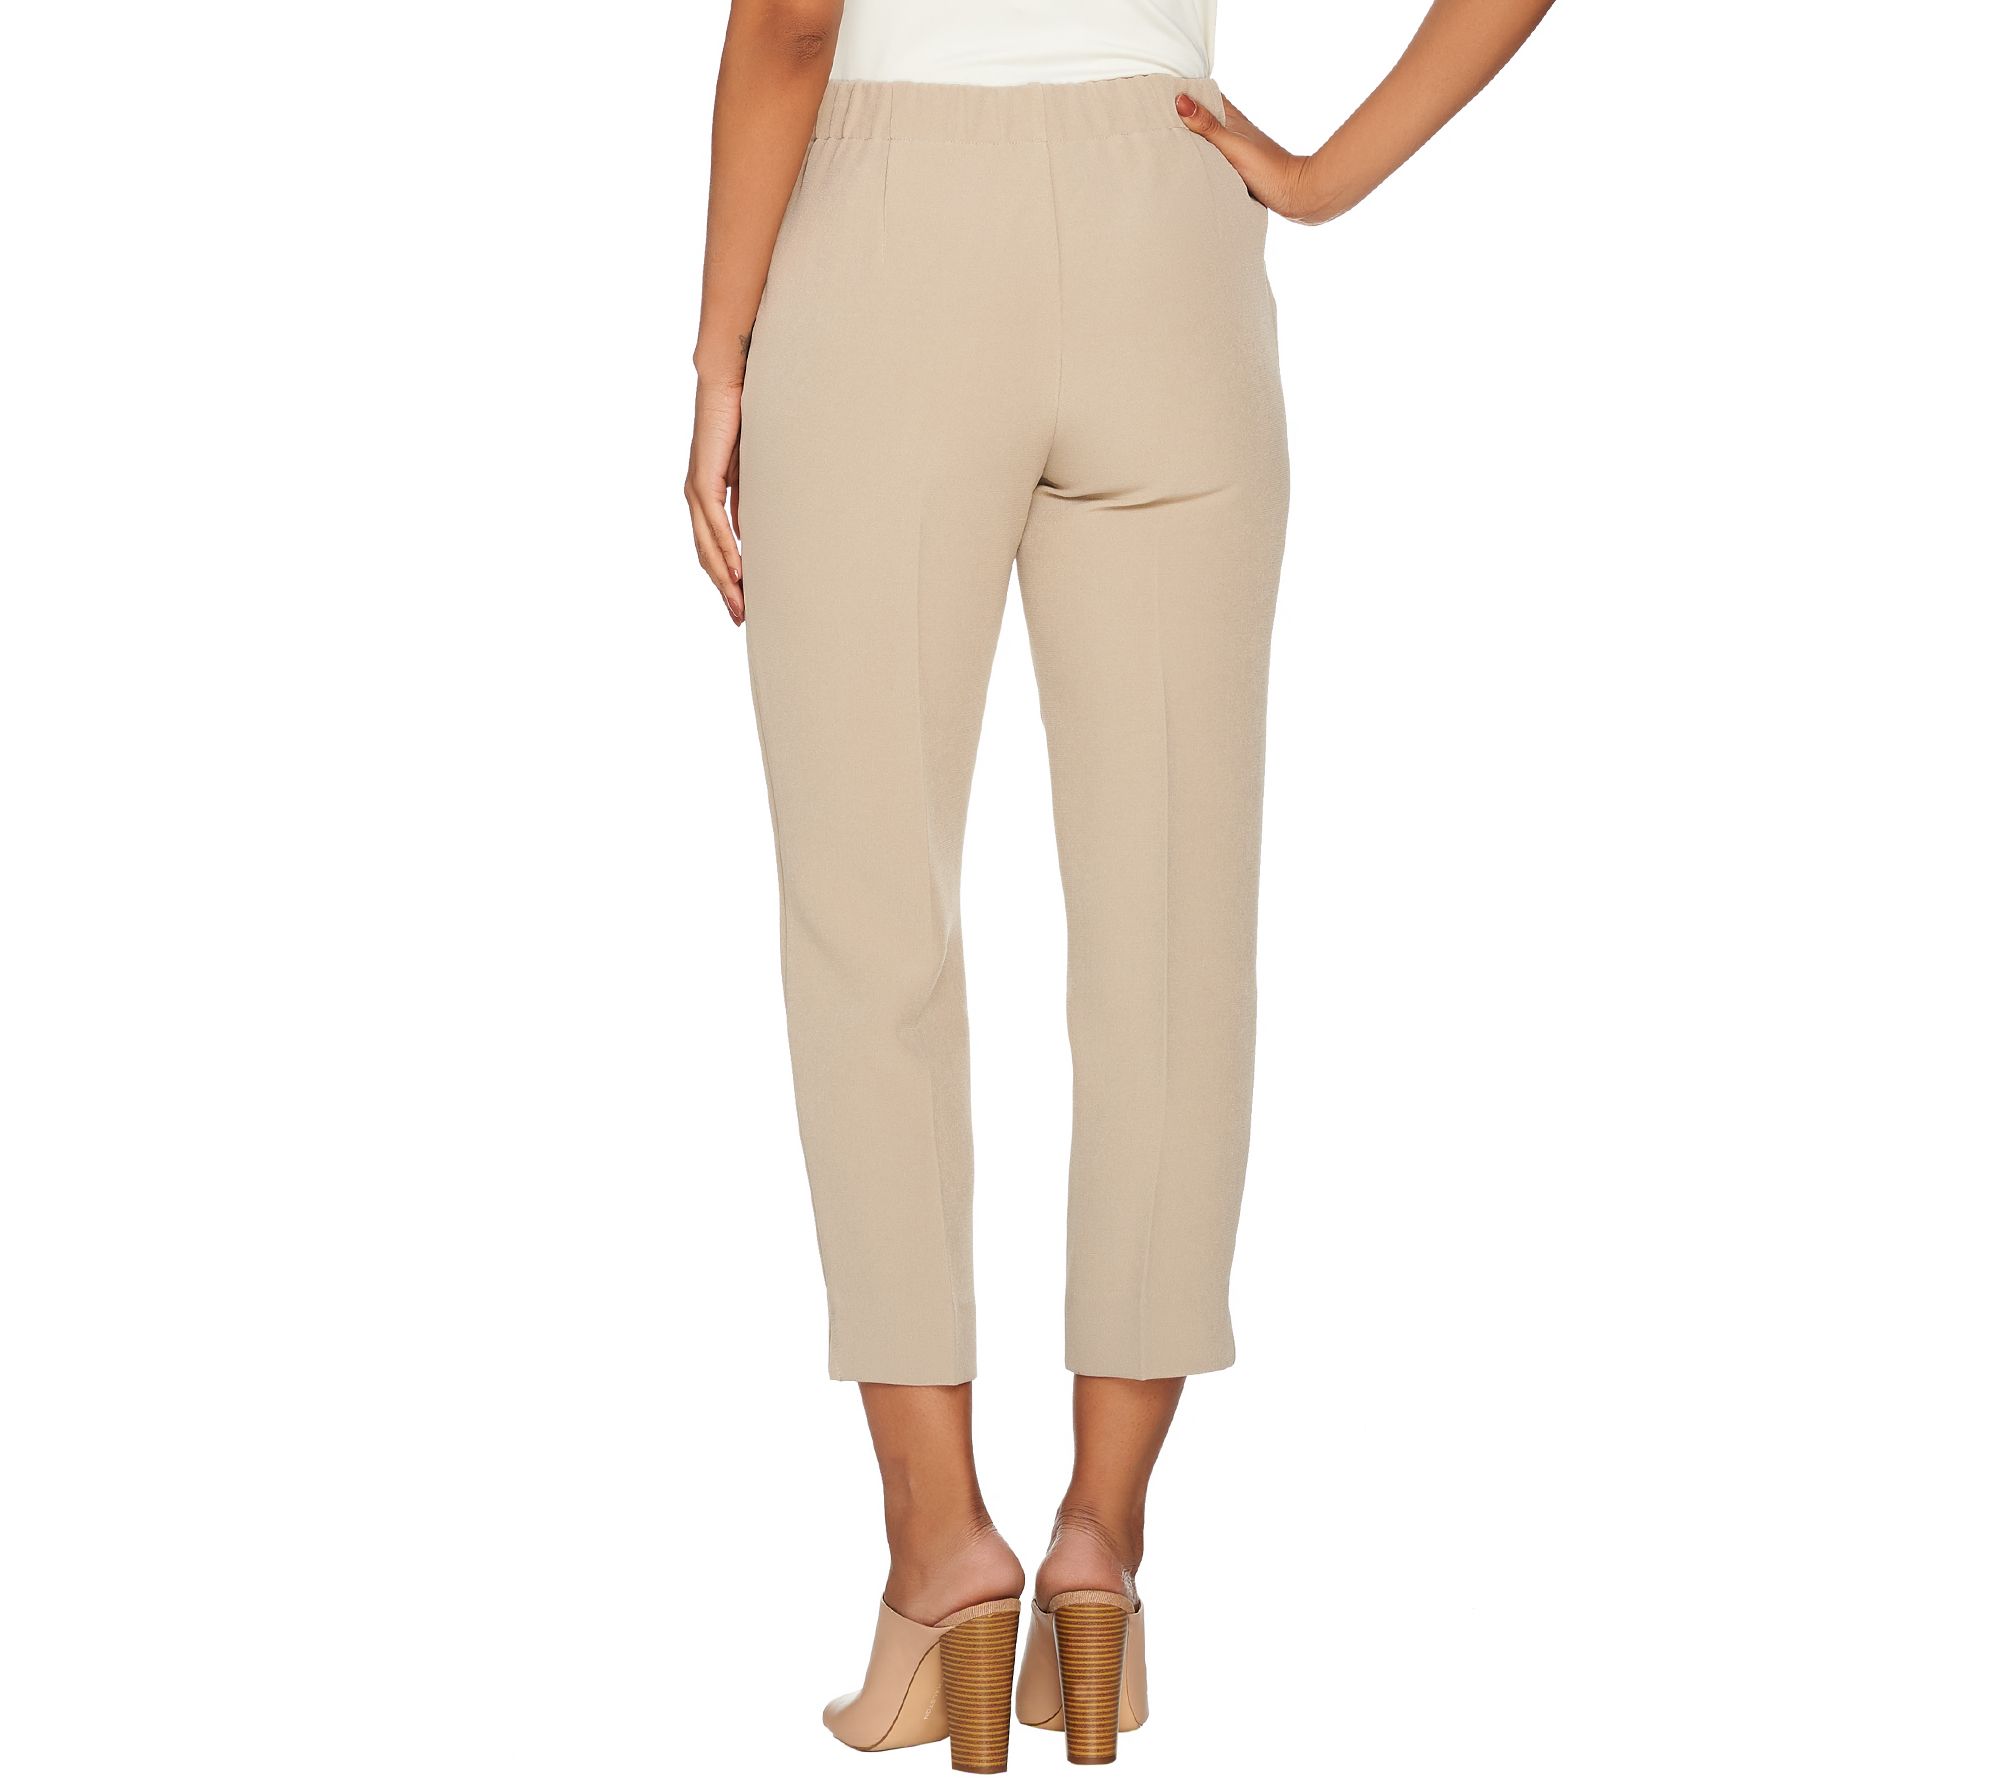 Dennis Basso Textured Pull-On Crop Pants - QVC.com